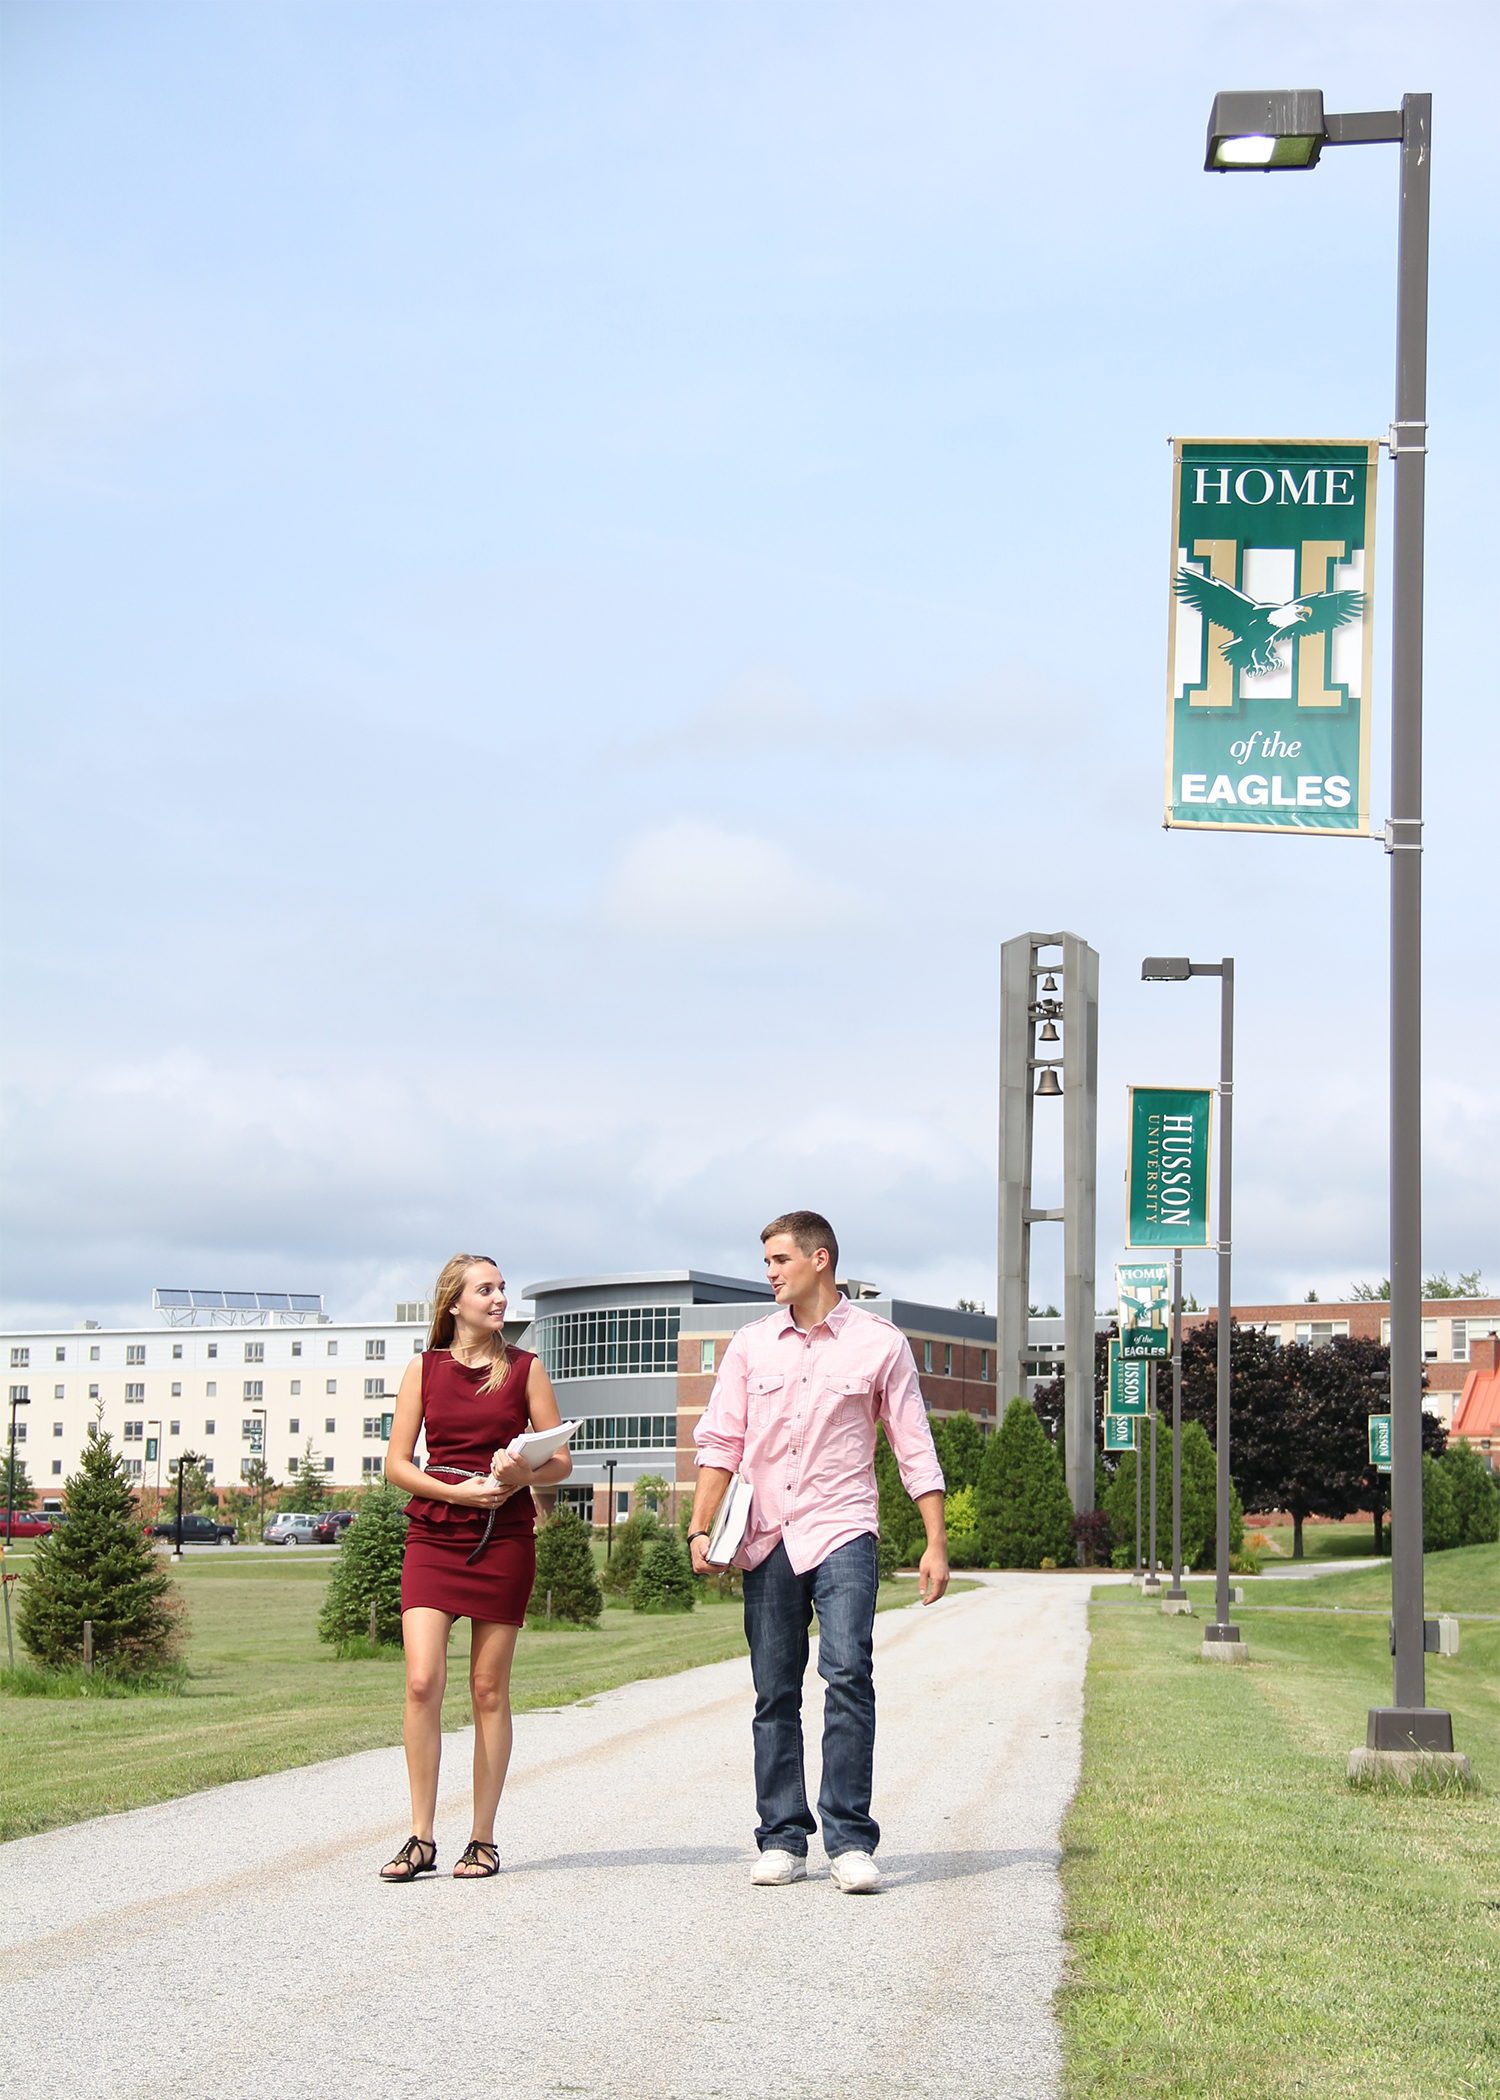 The campus of Husson University in Bangor, Maine